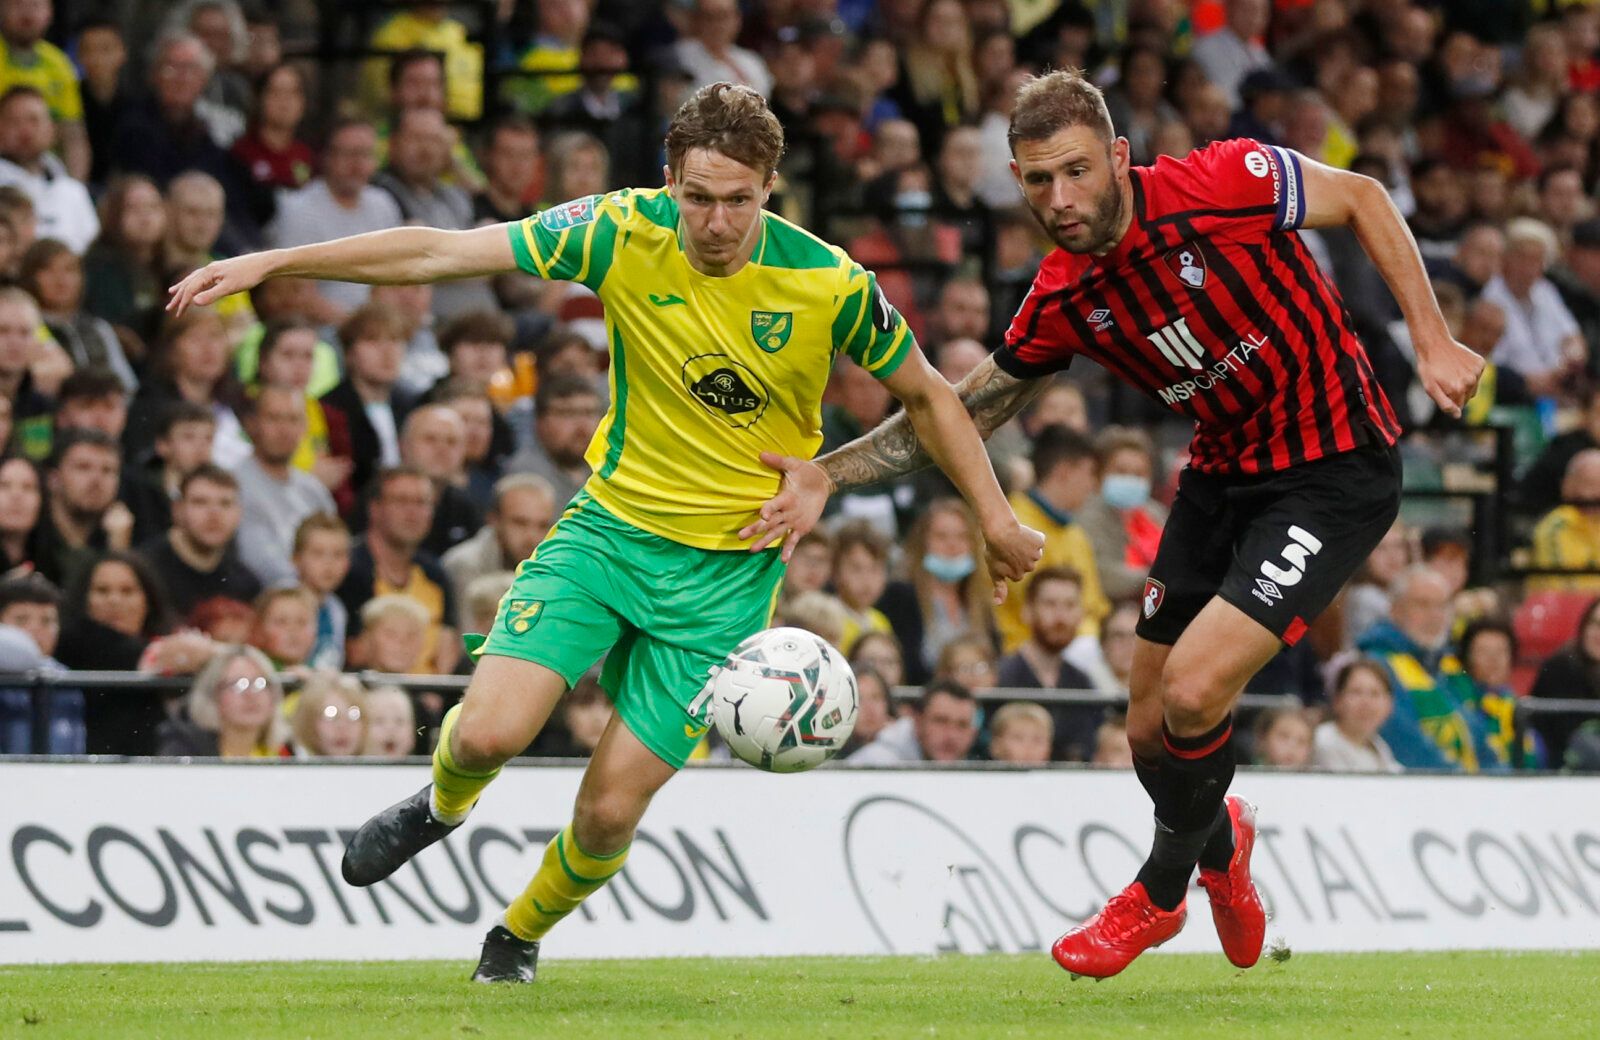 Soccer - England - Carabao Cup Second Round - Norwich City v AFC Bournemouth - Carrow Road, Norwich, Britain - August 24, 2021 Norwich City's Kieran Dowell in action with AFC Bournemouth's Steve Cook Action Images via Reuters/Matthew Childs